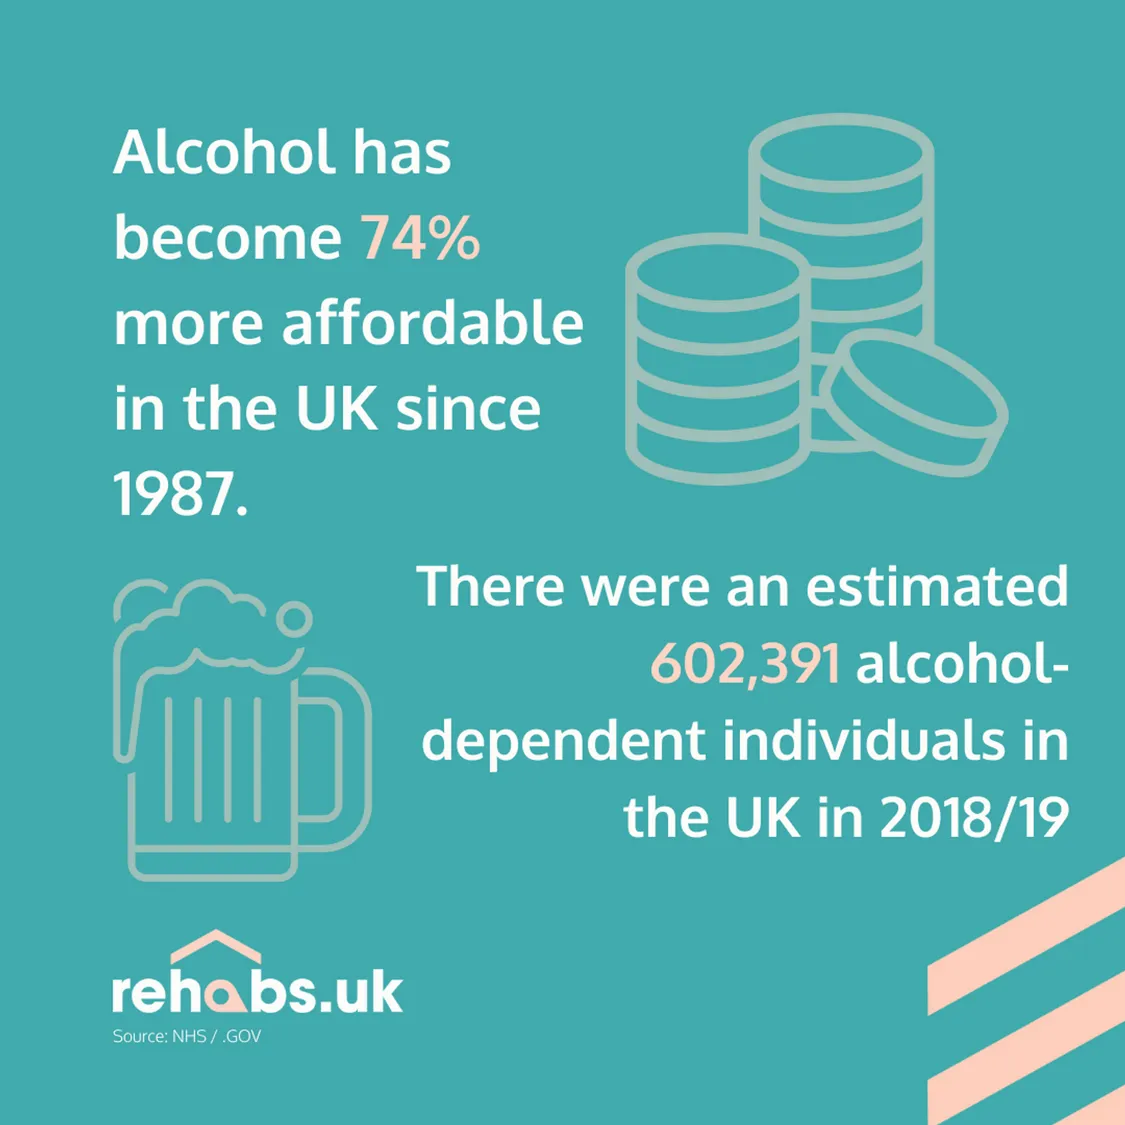 Infographic that shows alcohol prices since 1987 has risen by 74% in the UK